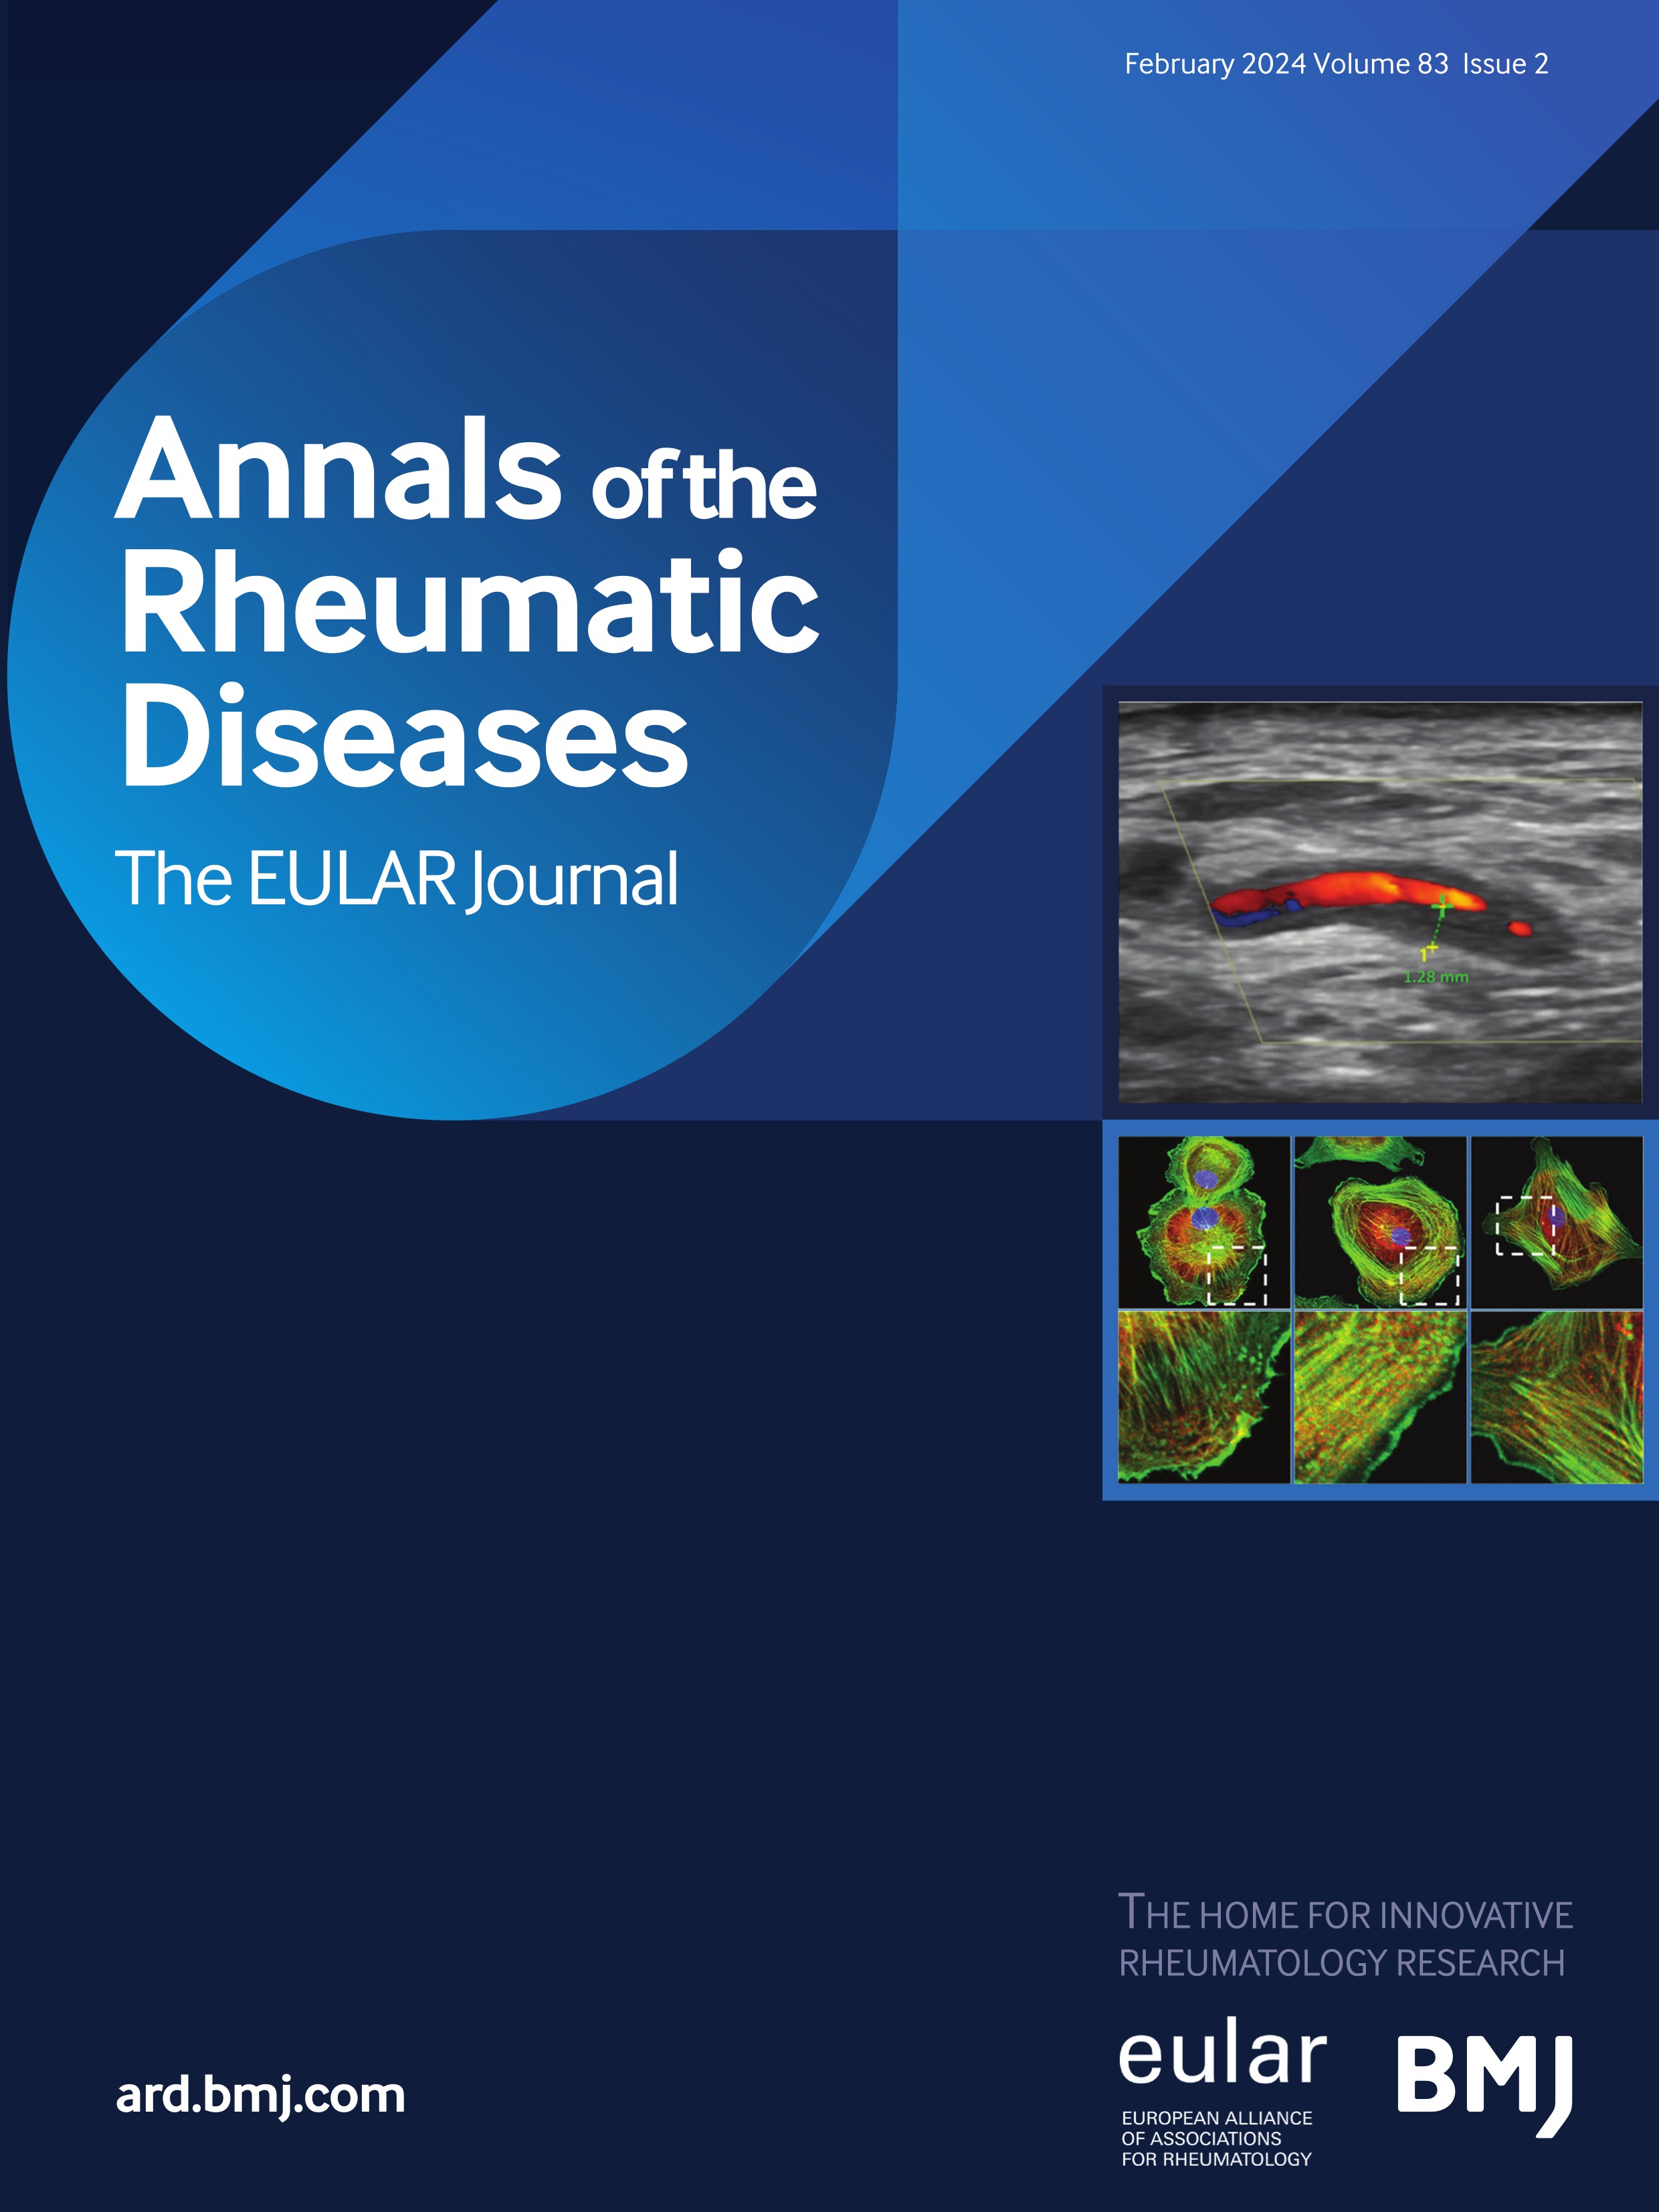 Annals of the Rheumatic Diseases collection on osteoarthritis (2018-2023): hopes and disappointments